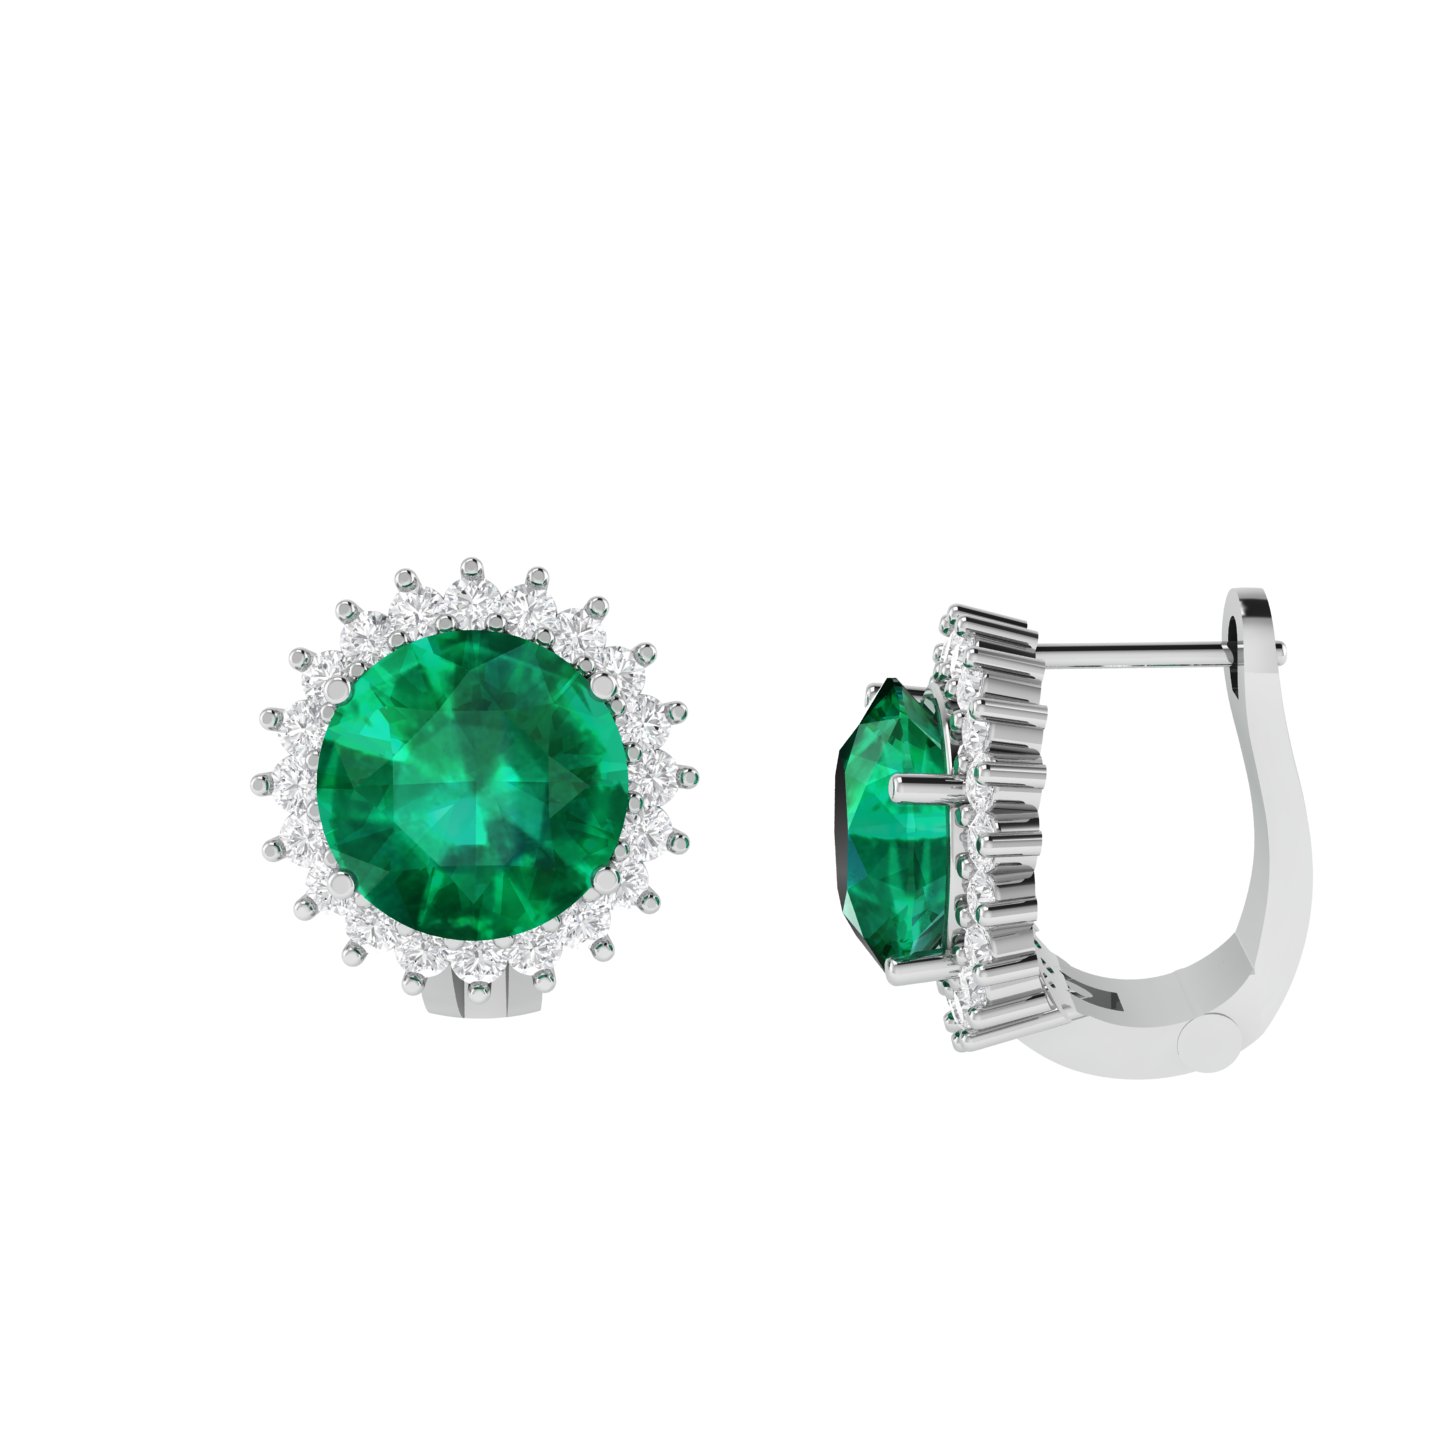 Diana Round Emerald and Glittering Diamond Earrings in 18K Gold (3.1ct)